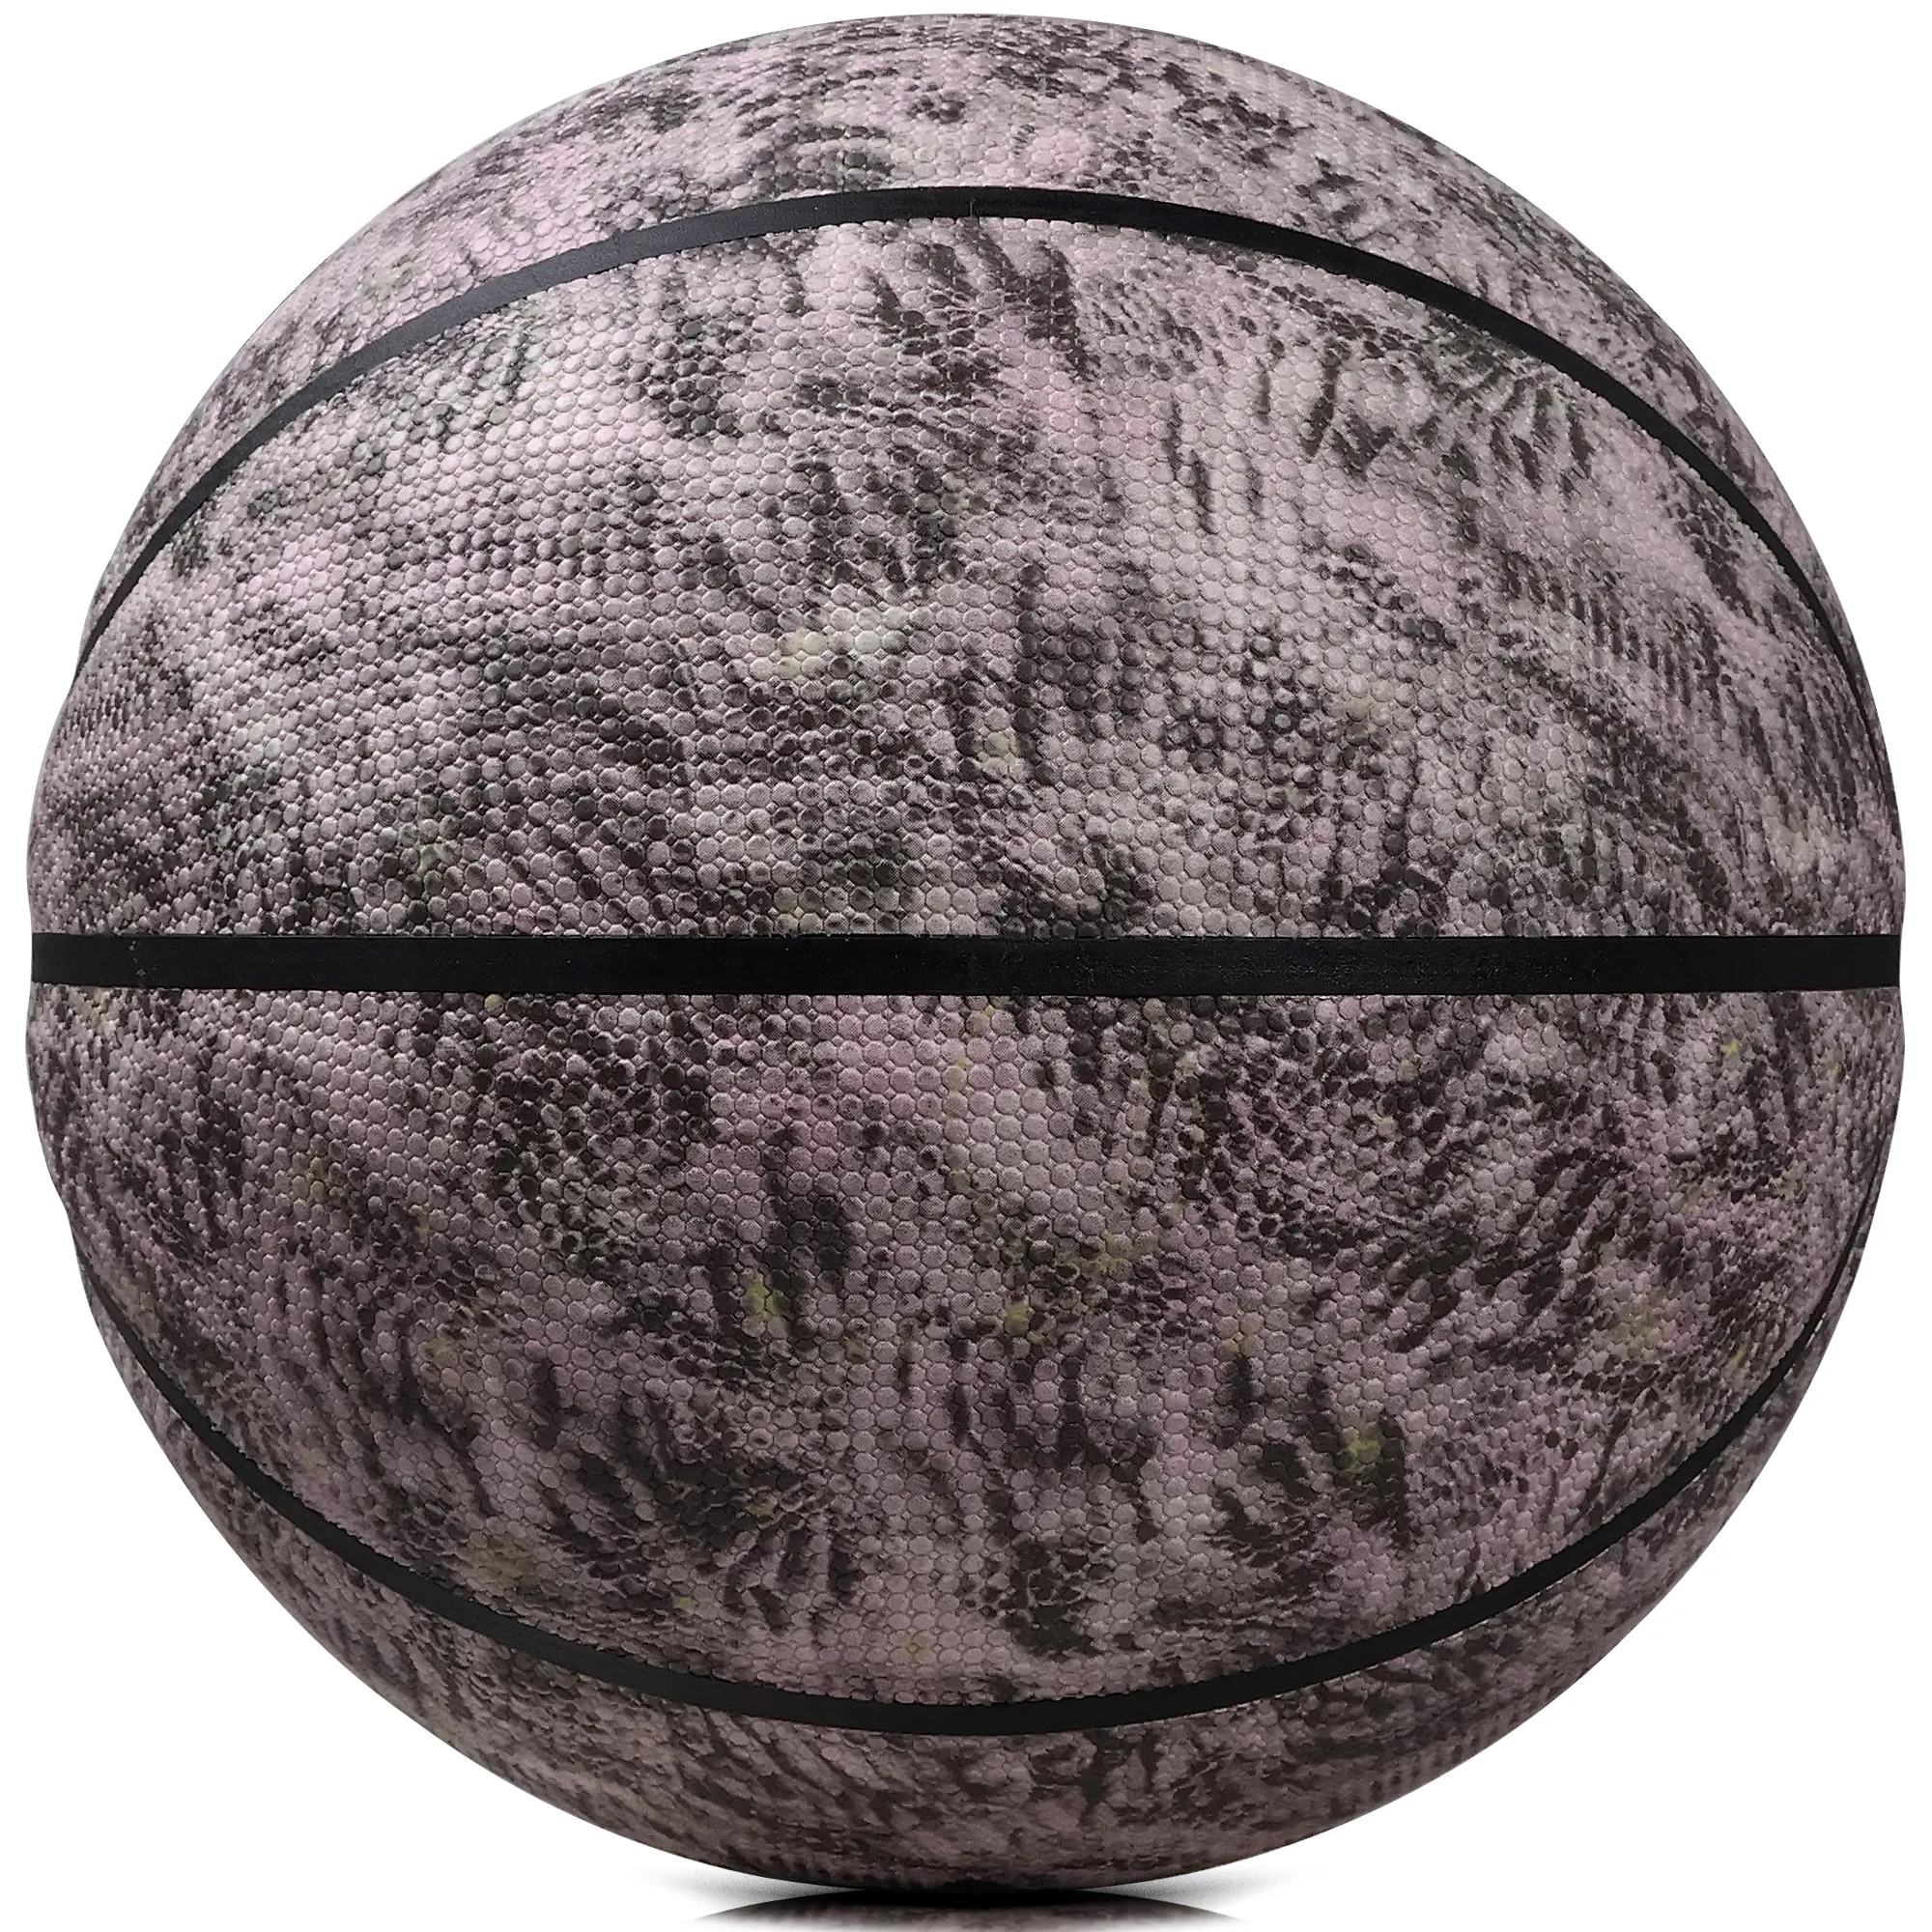 Soft Touch Official Size Basketball  Customizable  Assorted Colors Available